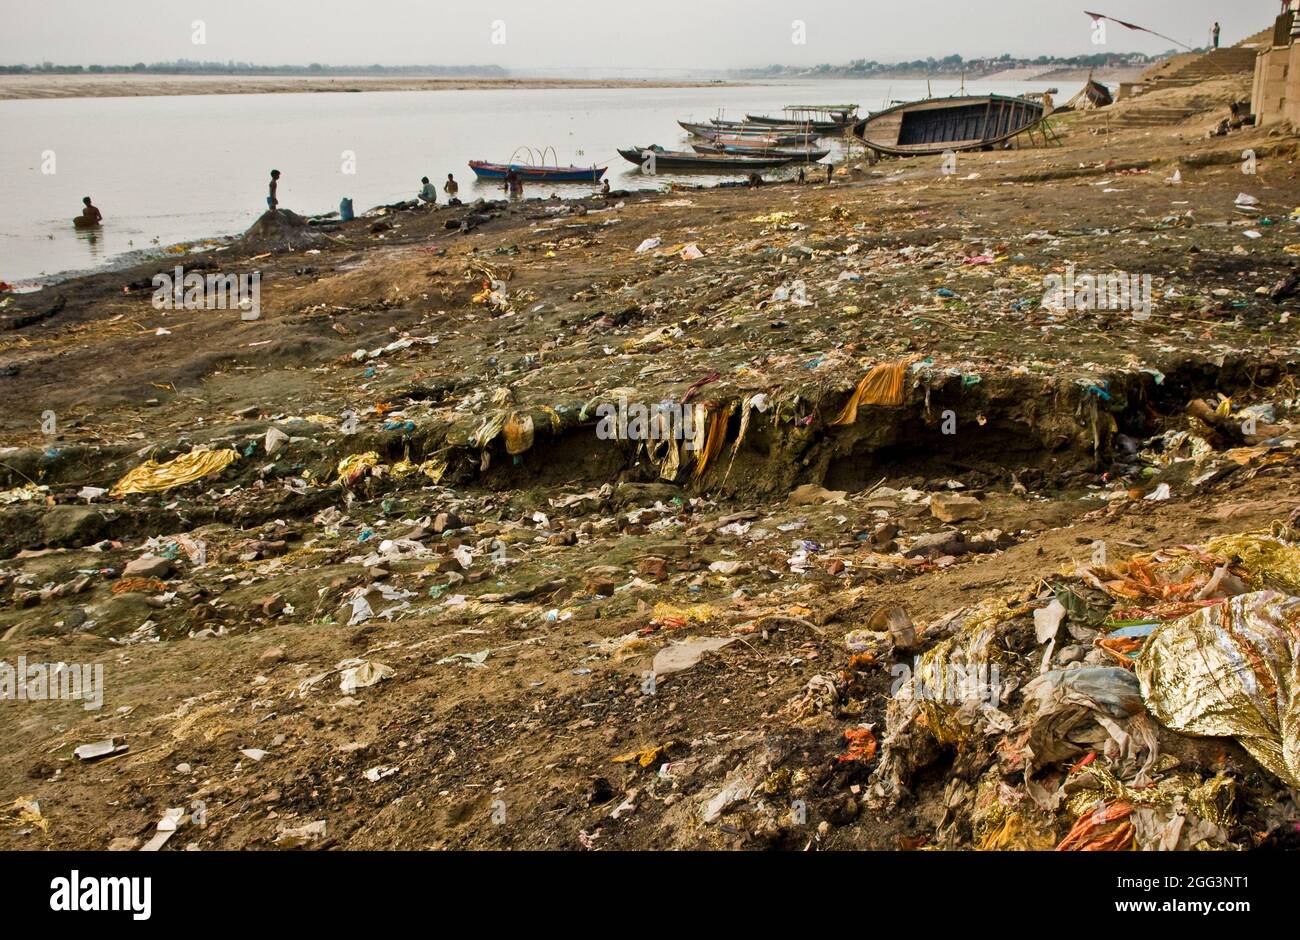 Waste is visible on the banks of the River Ganges in Varanasi, India, due to an historic low water level because of drought. Stock Photo